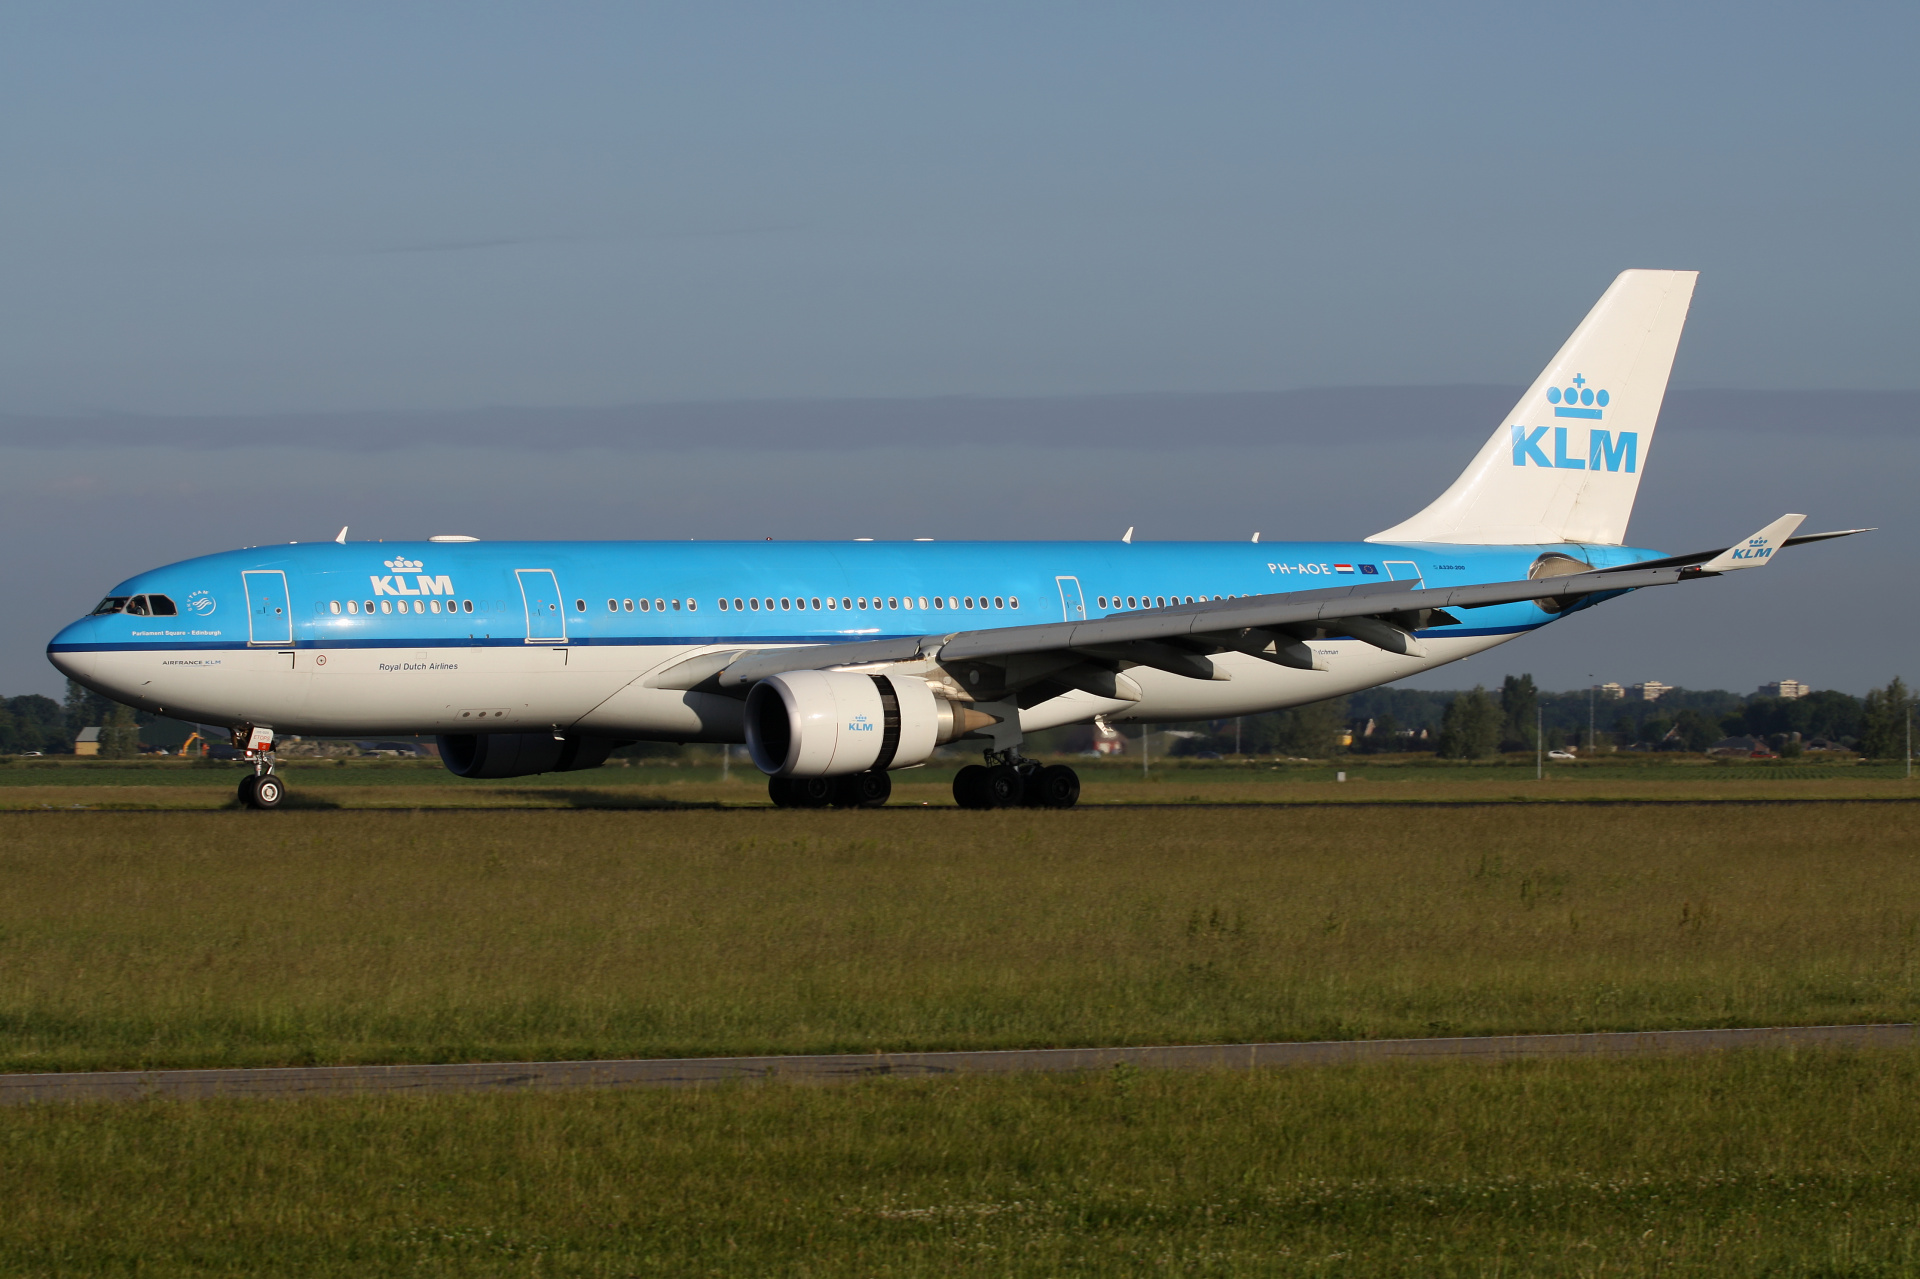 PH-AOE (Aircraft » Schiphol Spotting » Airbus A330-200 » KLM Royal Dutch Airlines)